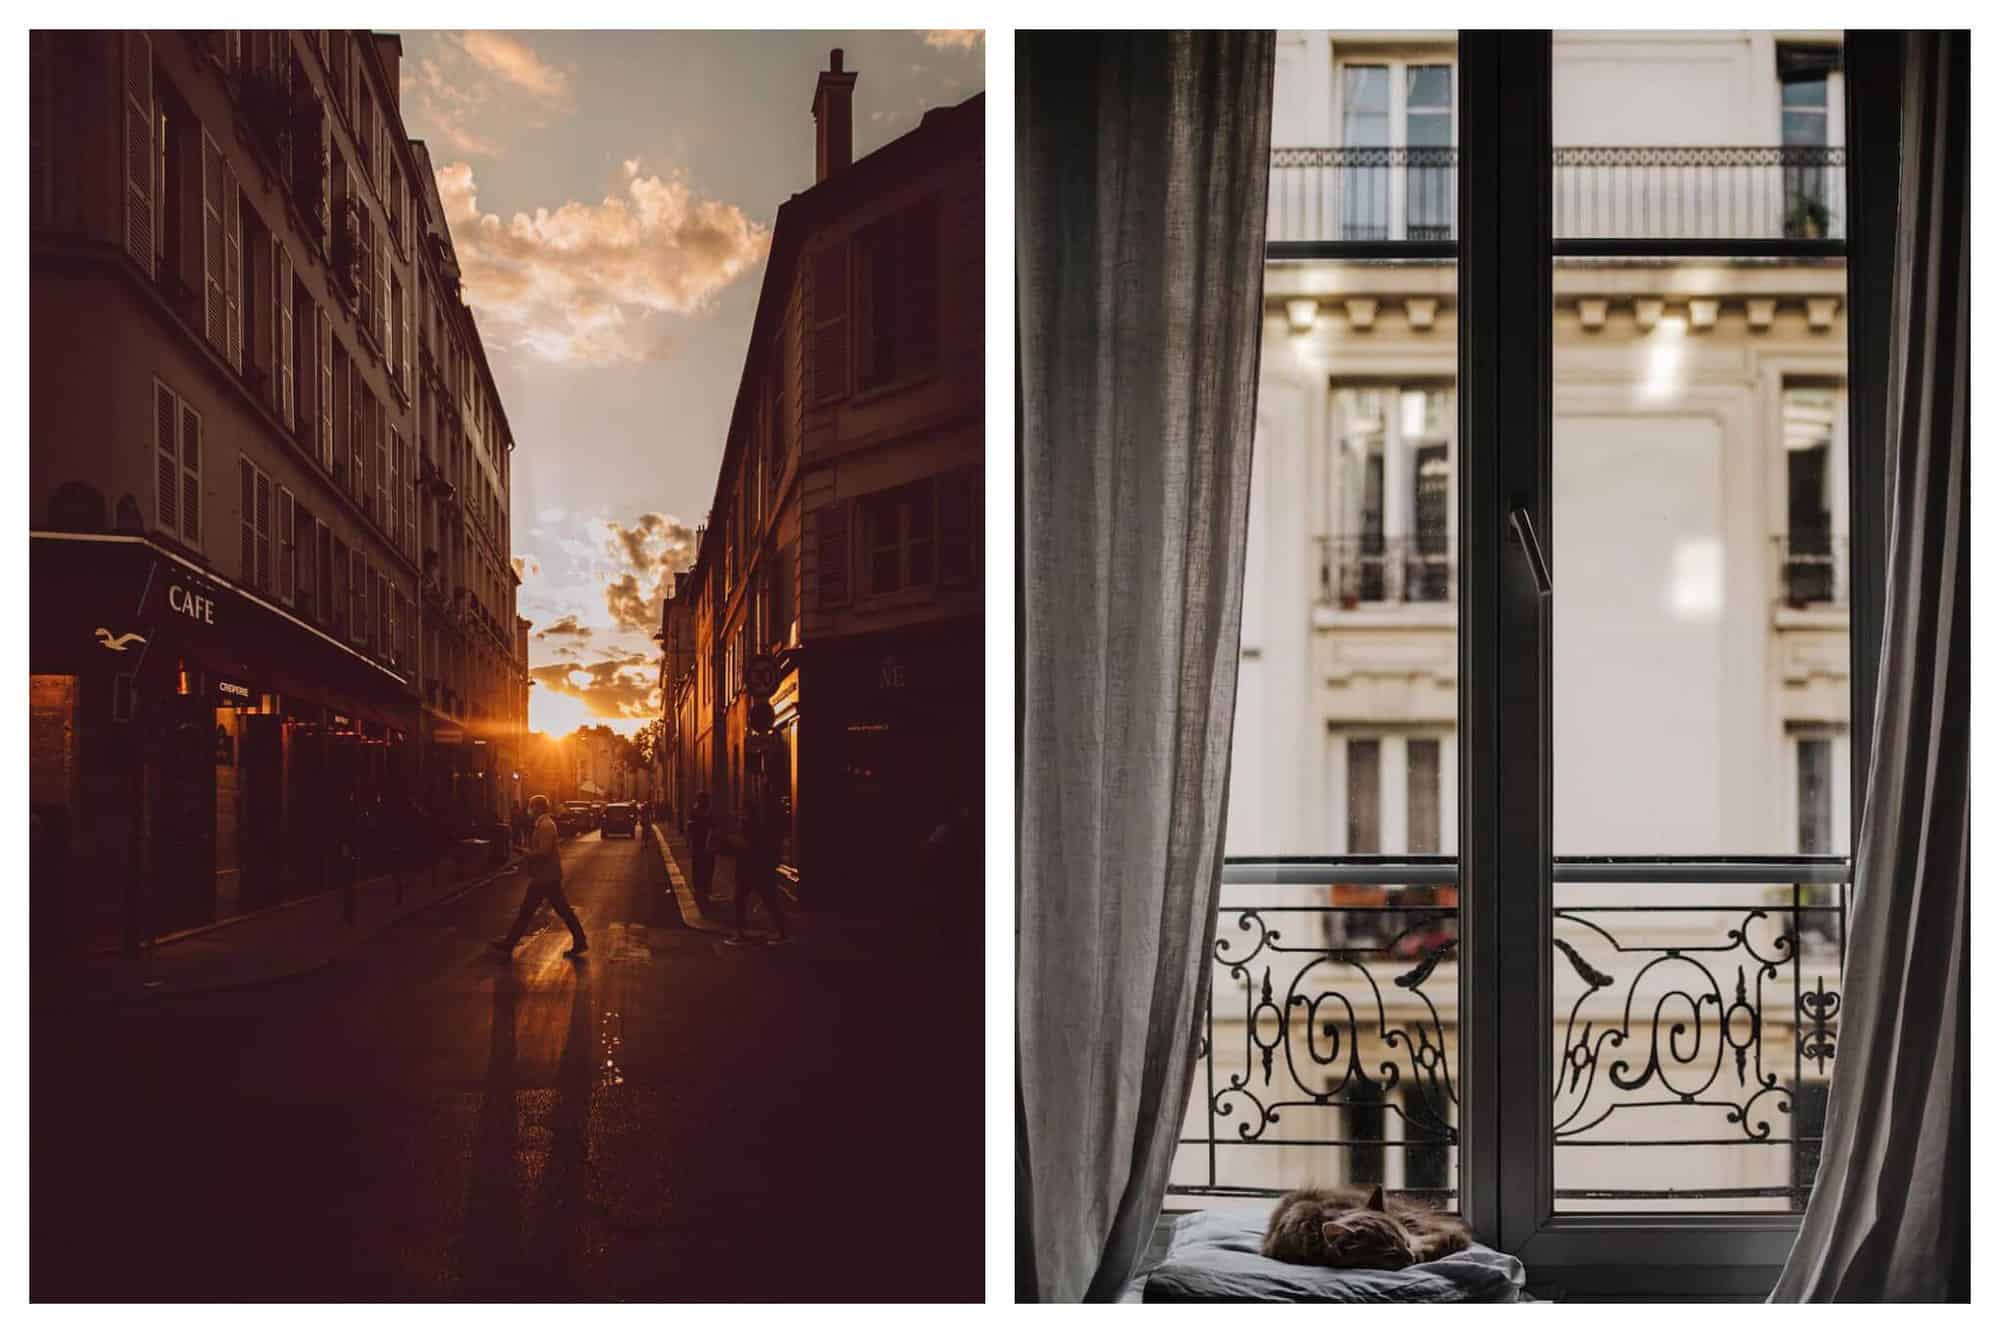 Left: a street in Paris at sunset. Buildings are visible as well as someone walking in the street. The sky is blue and there are clouds and the sun that is setting is shining brightly. Right: a window in the interior of an apartment in Paris. To the left is a cat sleeping on a cushion. There are cream colored curtains of the window and another Parisian building can be seen outside.